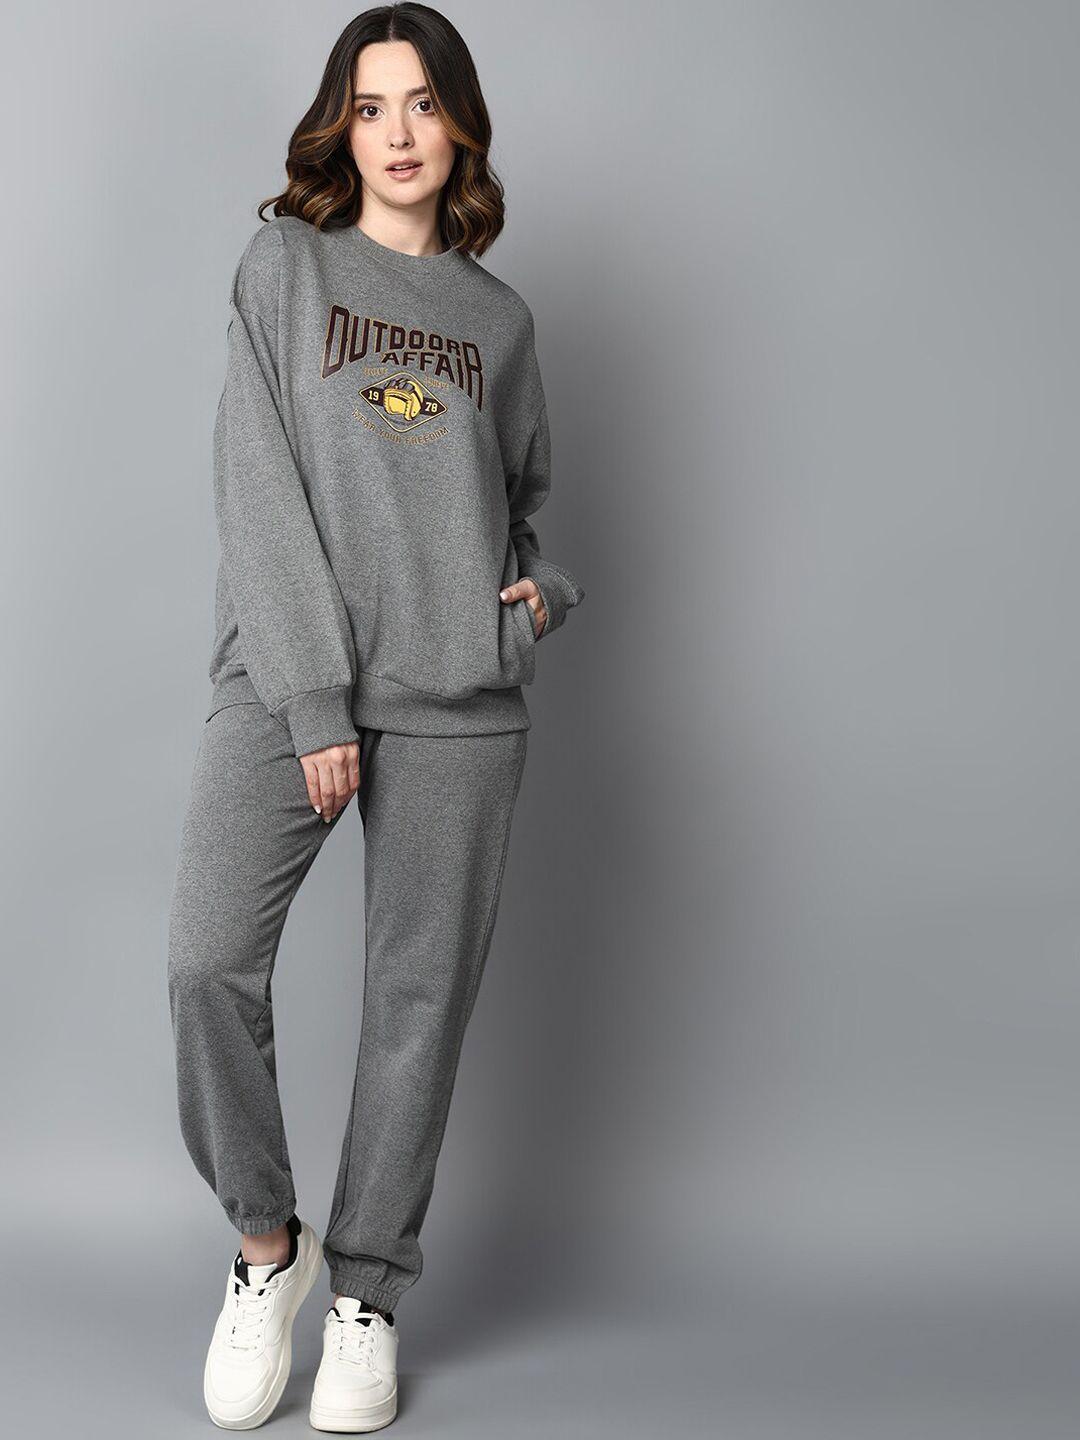 the roadster lifestyle co. grey typography printed sweatshirt & joggers tracksuit